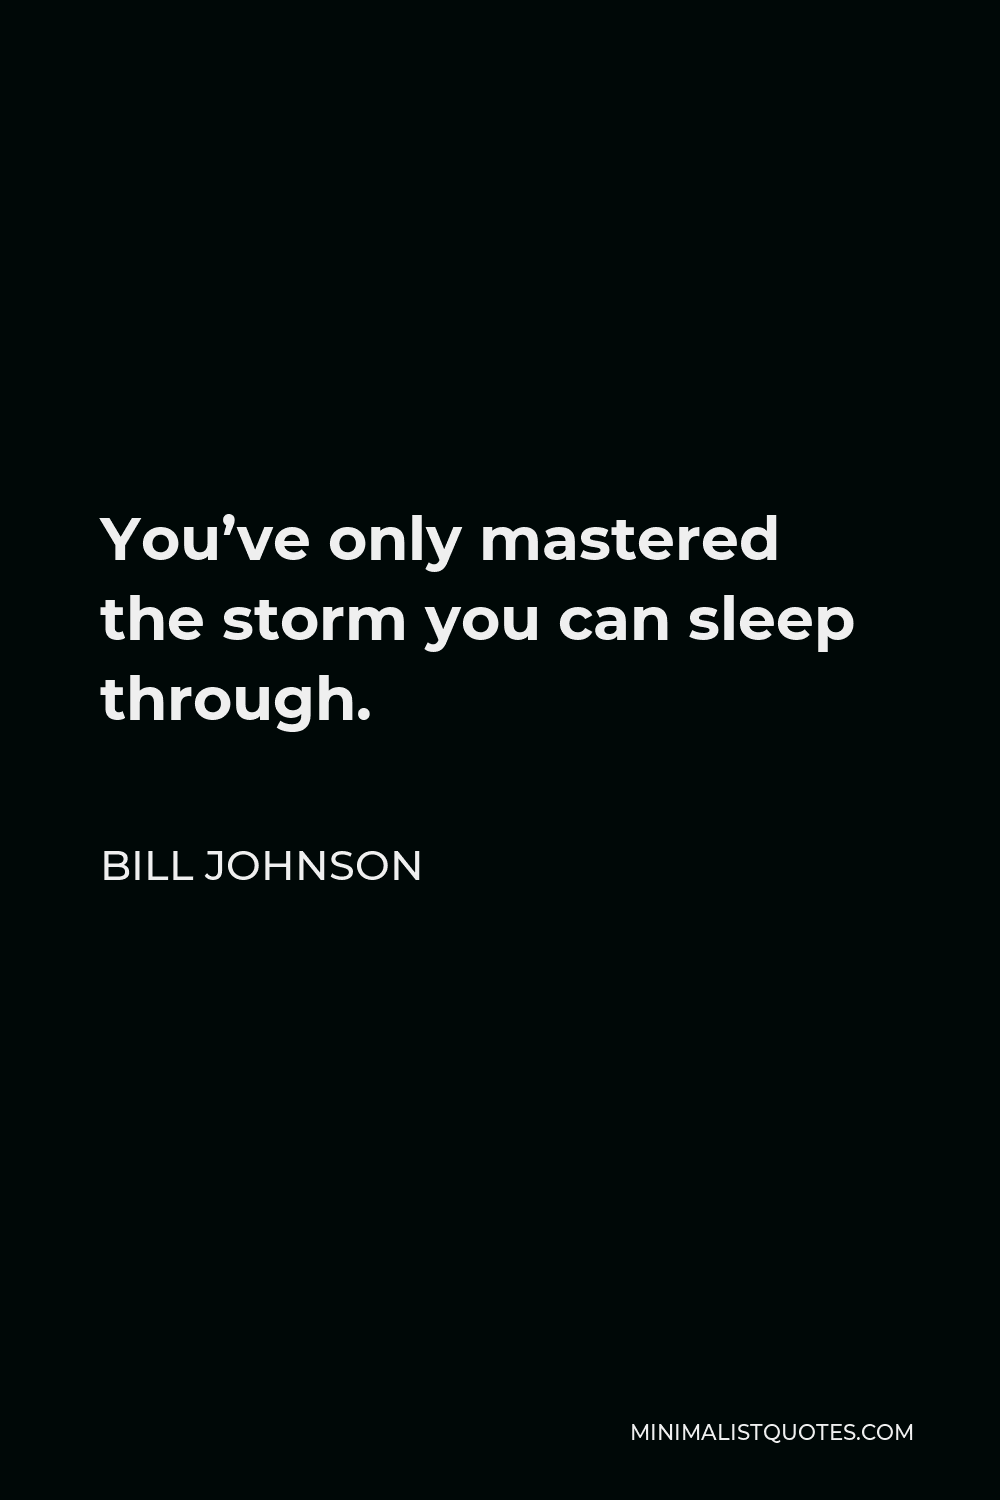 Bill Johnson Quote - You’ve only mastered the storm you can sleep through.